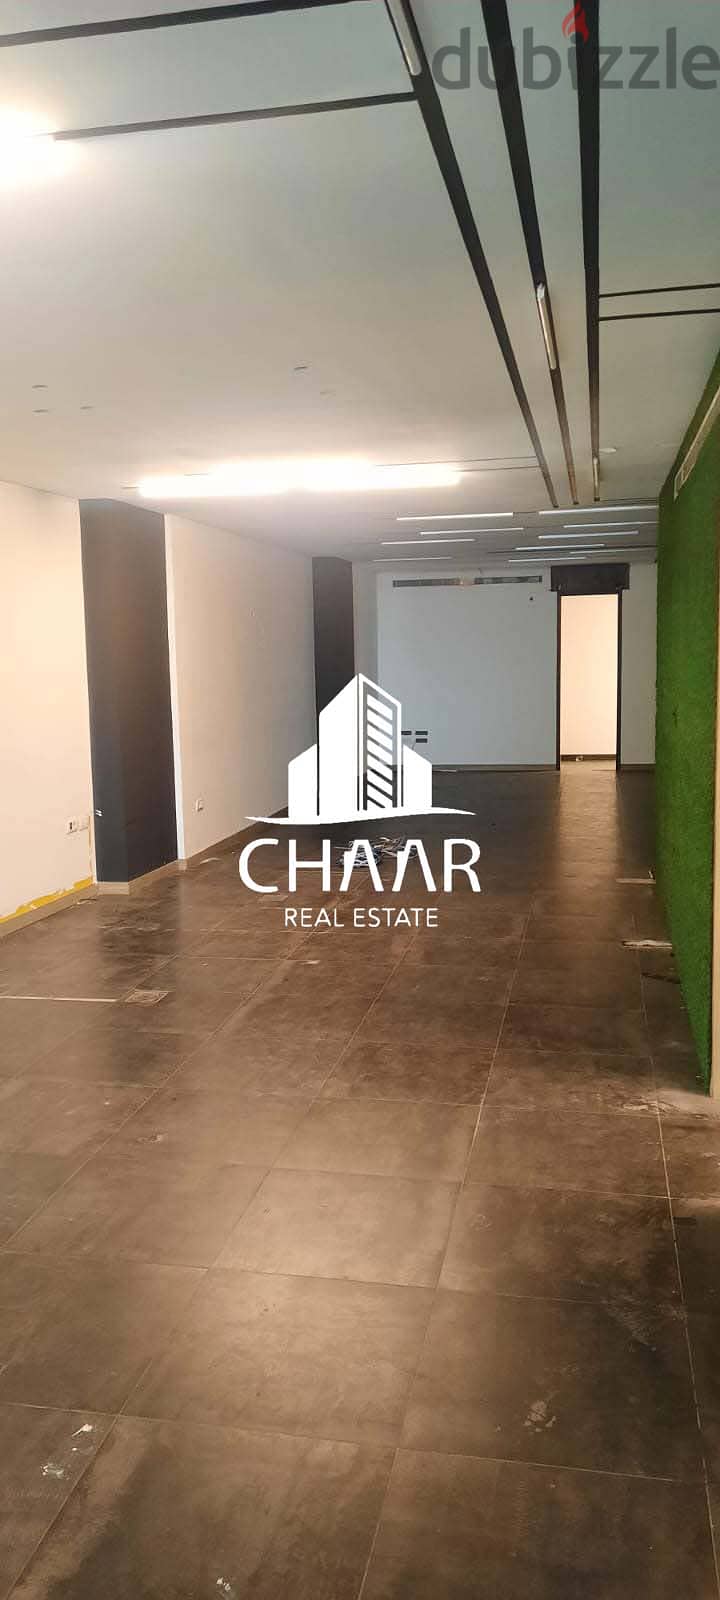 #R1845 - Spacious Office for Rent in Jal El Dib 1